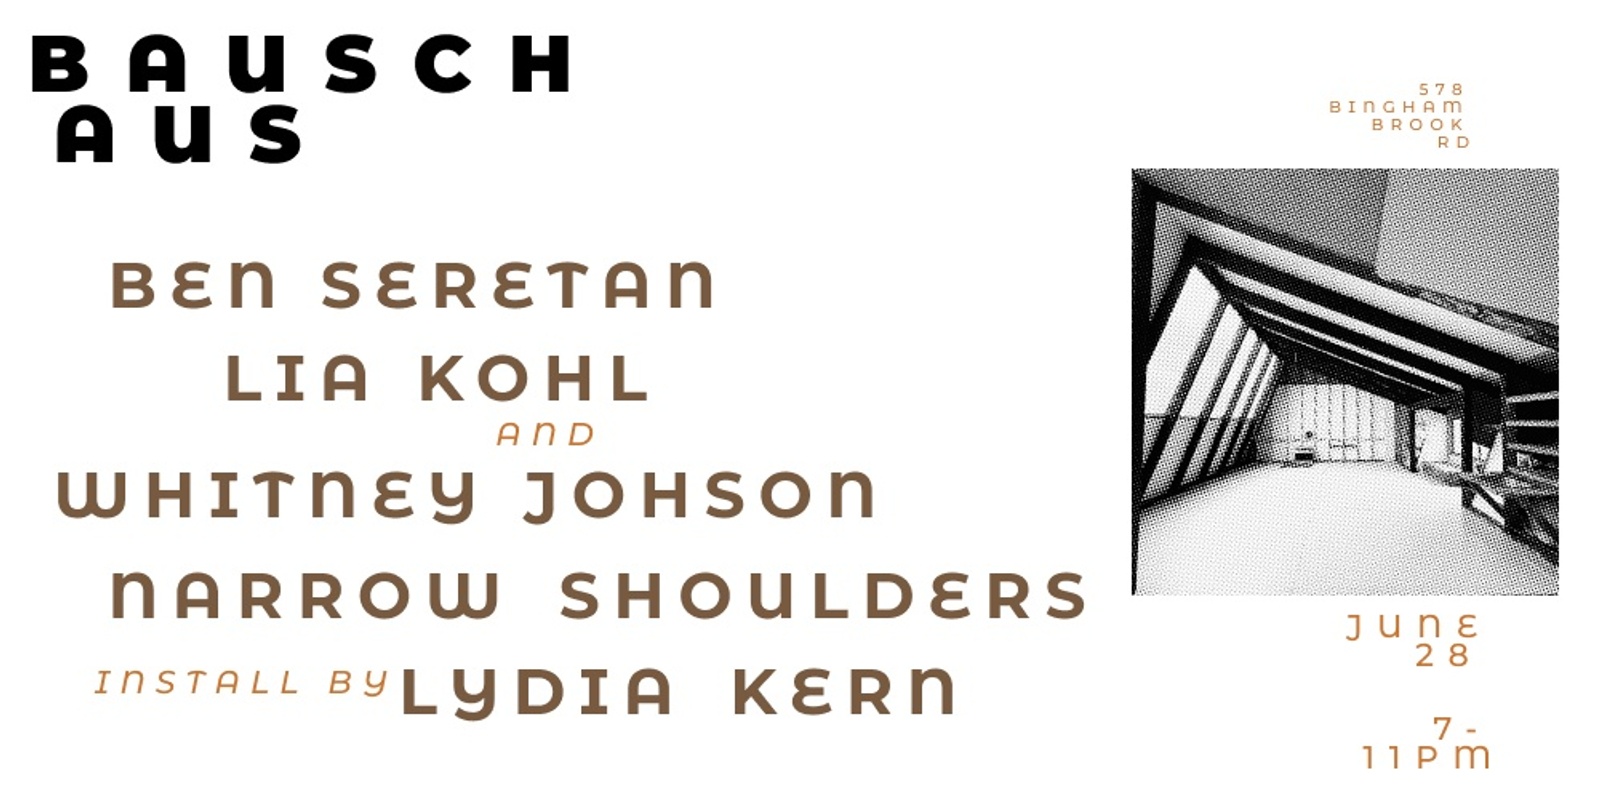 Banner image for Ben Seretan, Lia Kohl & Whitney Johnson, and Narrow Shoulders LIVE at Bauschaus VT...PLUS Install by Lydia Kern